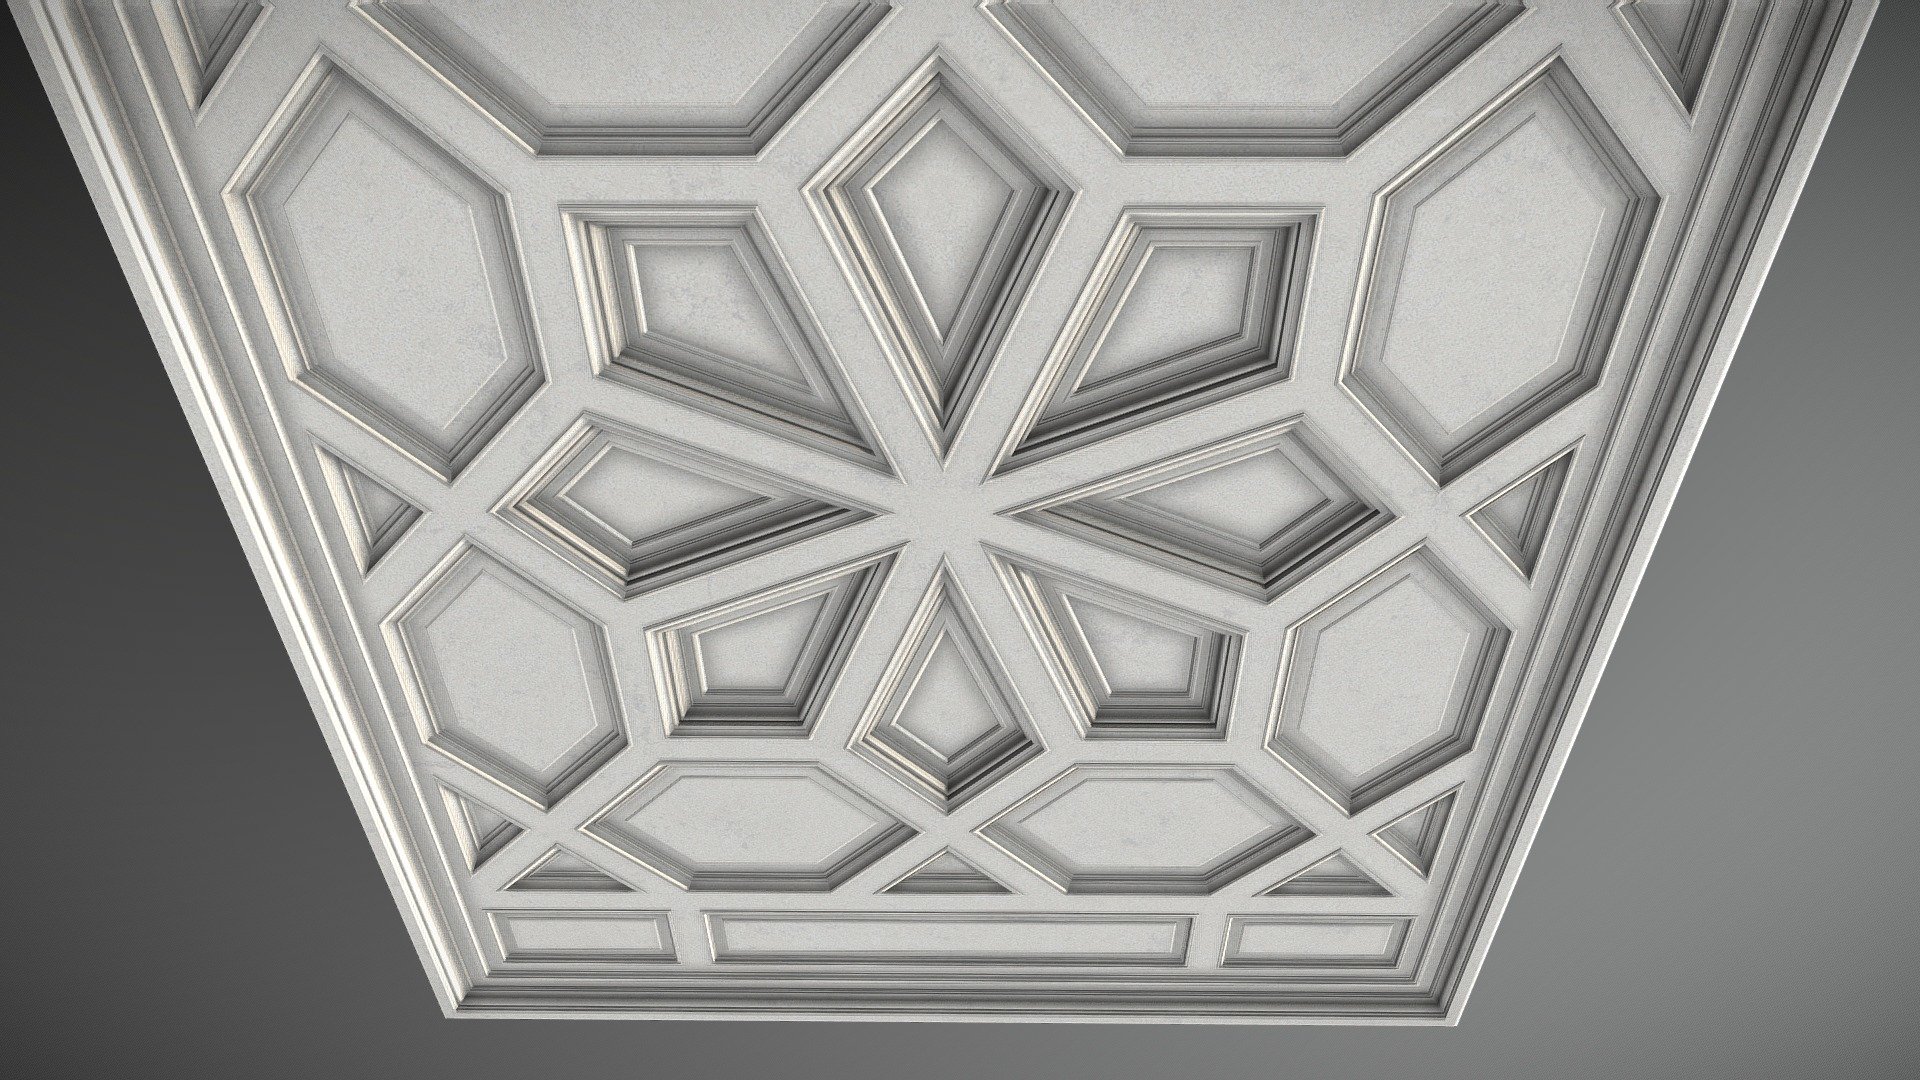 The ceiling design pl-c4 from the collection of the Decoright. The Original sizes are 4.5 by 5.5 meters.

UV unwrapping - automatic from a CAD model.

The price includes one adjustment to the sizes of your project. Please, treat this model as a placeholder, request the sizes before final rendering. I’ll send you a fitted version within a few hours.

The CAD version for your project and more size variation are also possible to purchase for the additional price 3d model